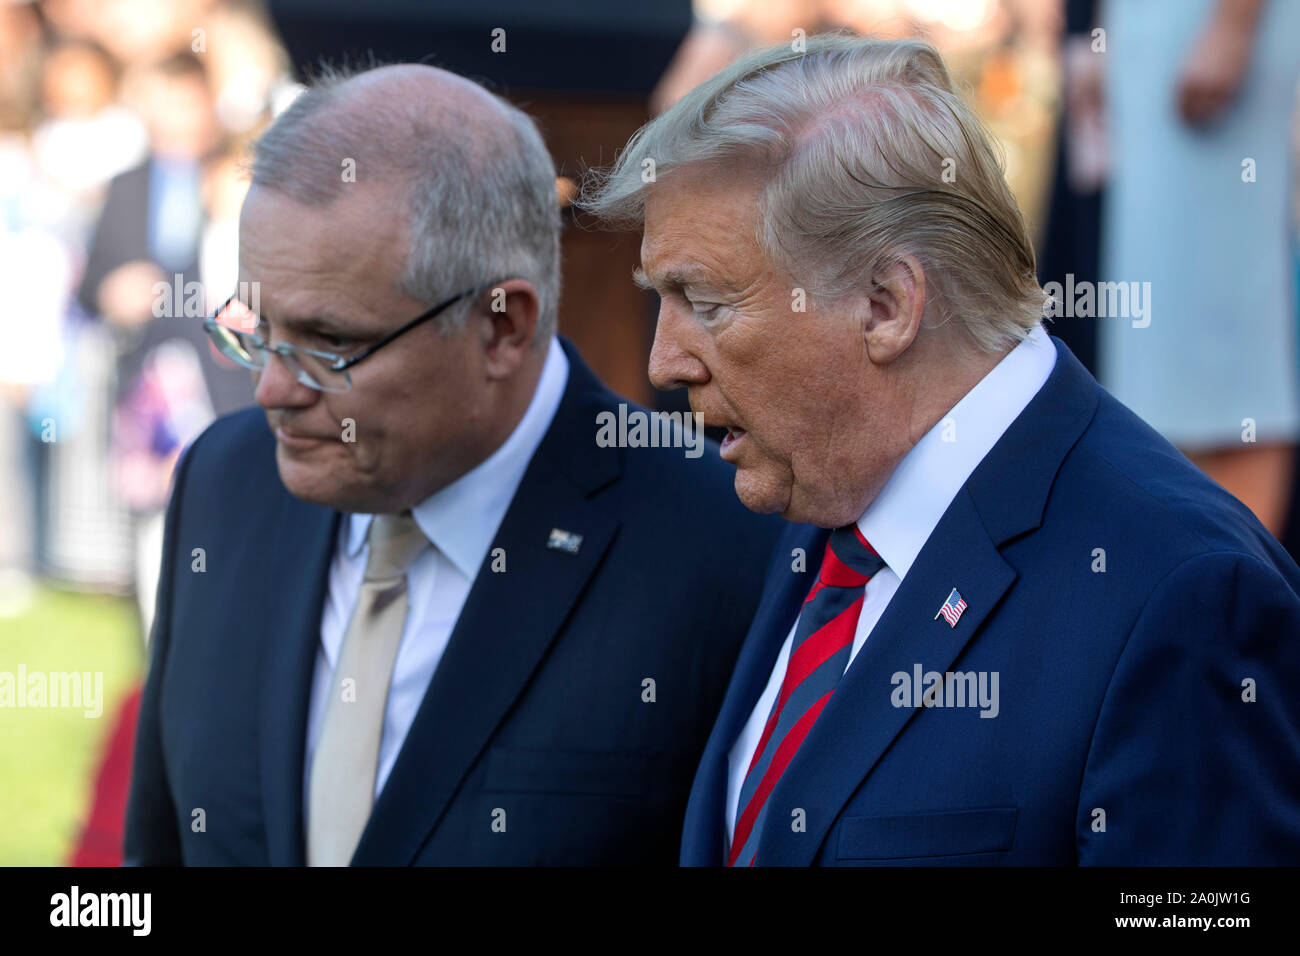 Washington DC, USA. 20th Sep, 2019. US President Donald J Trump (R)  welcomes Prime Minister of Australia Scott Morrison (L) to the South Lawn  of the White House for a state arrival